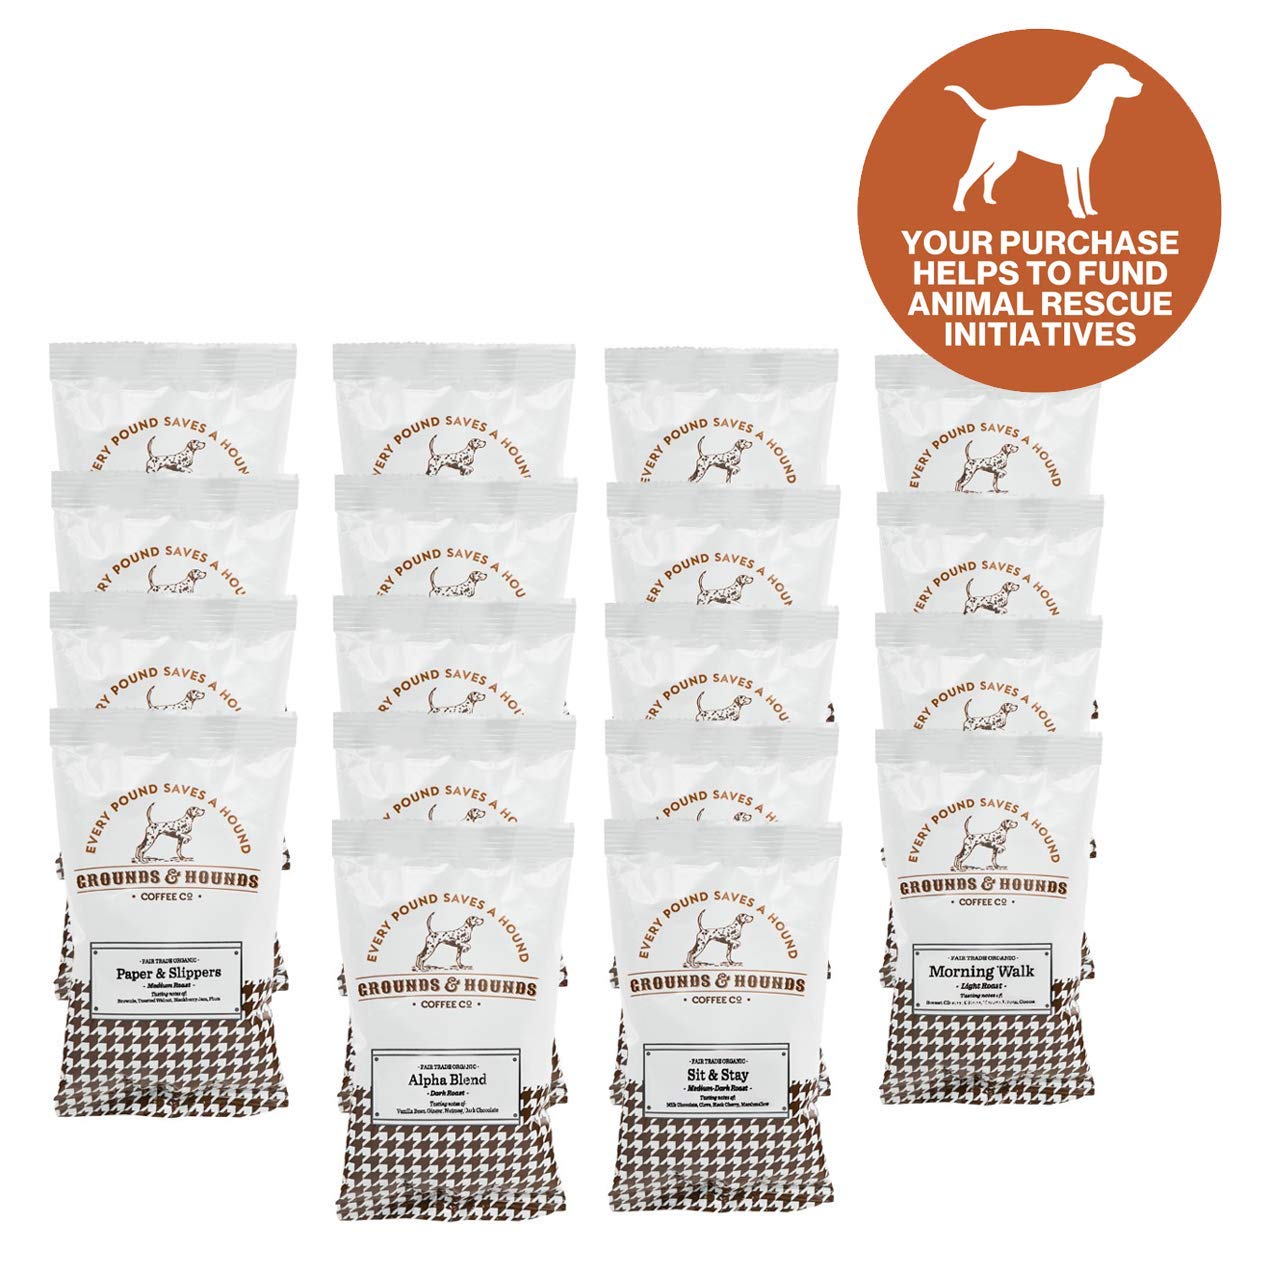 Grounds & Hounds Sample Packs - Ground Coffee - 100% Fair Trade Organic Ground Coffee Variety Frac Pack - Includes Eighteen - 2.5 oz. bags of our most popular Ground Coffee Blends (Coffee Variety), $40 @amazon.com